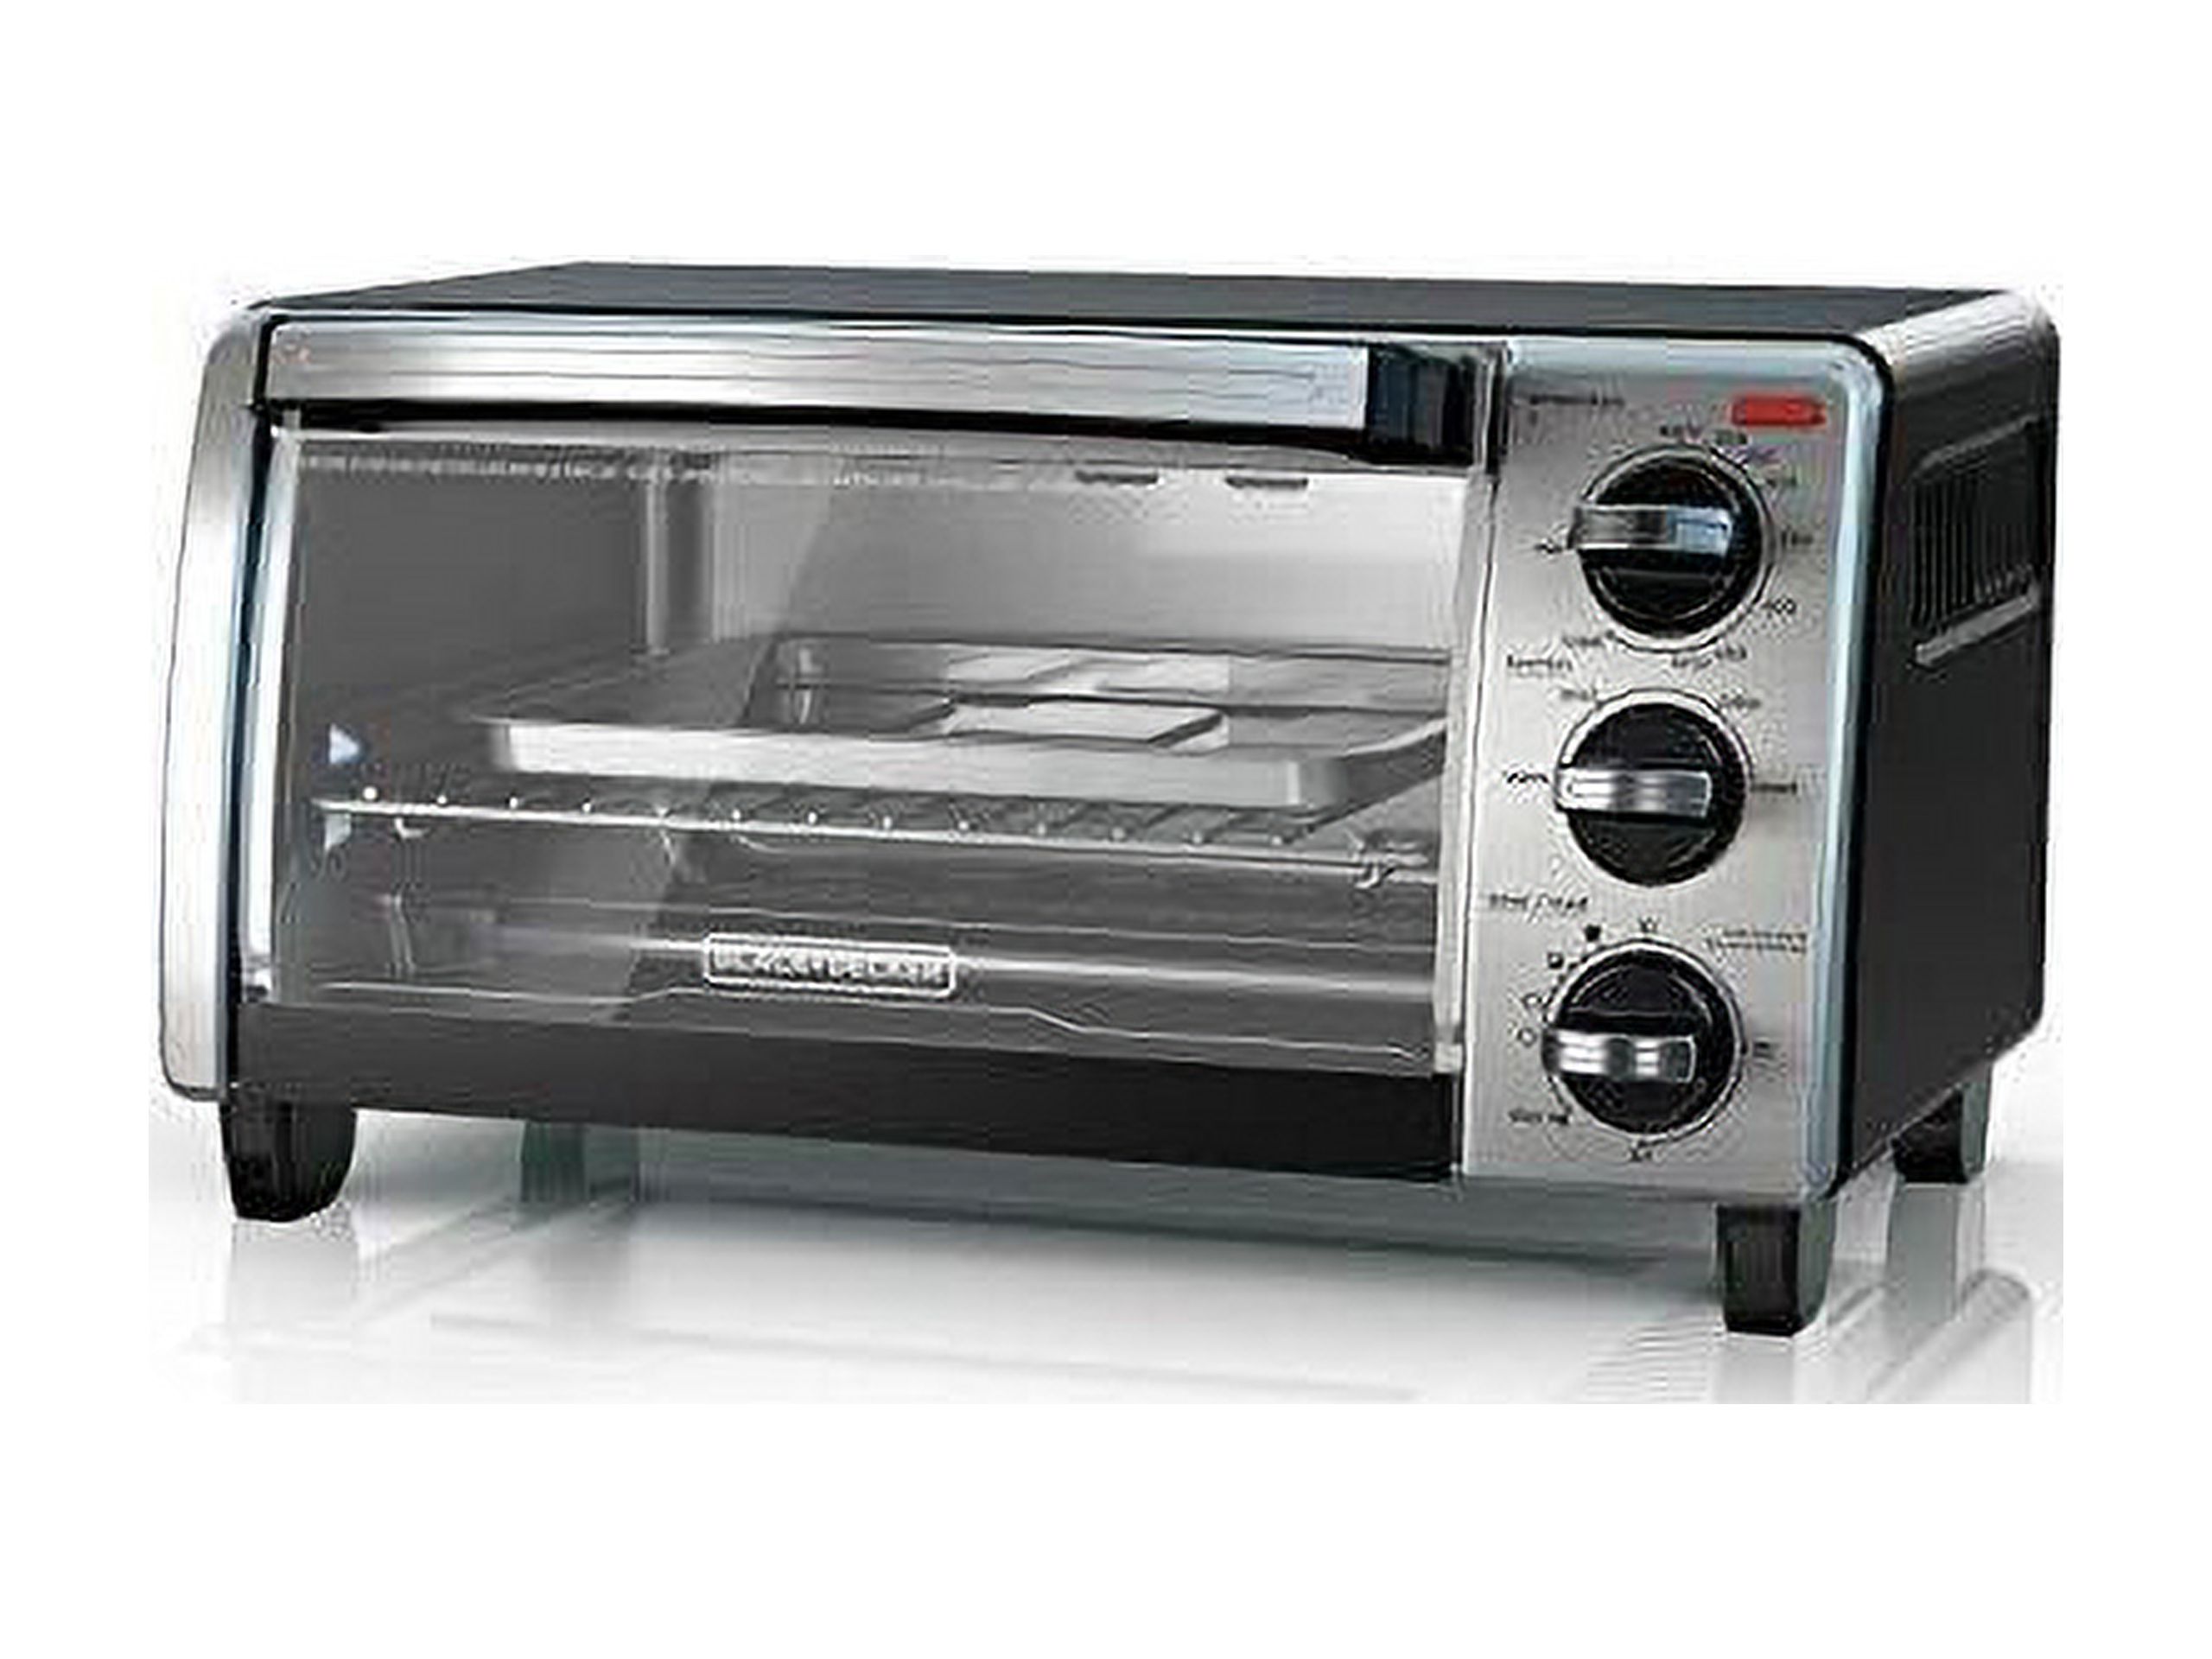 BLACK+DECKER 4-Slice Toaster Oven with Natural Convection, Black, TO1750SB - image 1 of 12